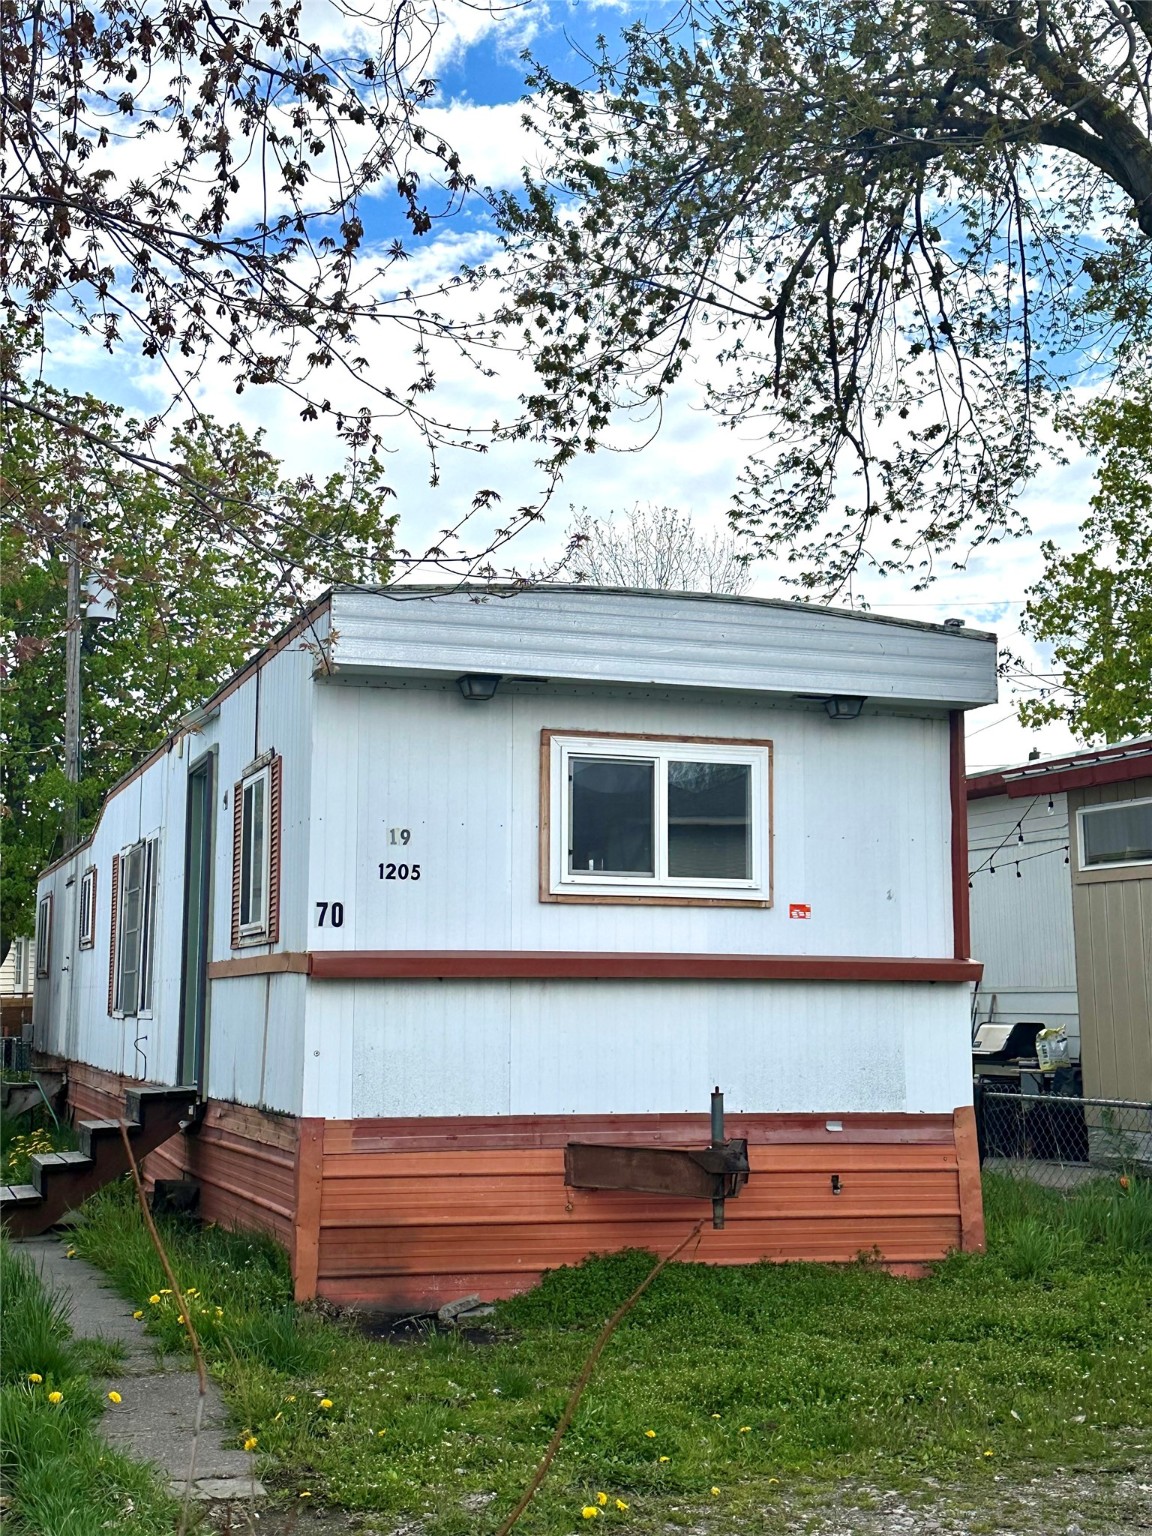 This 2 bedroom manufactured home is close to some great shopping and entertainment within Downtown Missoula and only 10 minutes from the University of Montana. This home includes a shed, patio and nice little yard. There has been a few updates made like newly sealed roof, updated bathroom and fresh paint. You are within walking distance of some of Missoula's best restaurants and breweries. This home is on a rented lot. For more information please contact Robin Rice 406-240-6503 or your real estate professional.